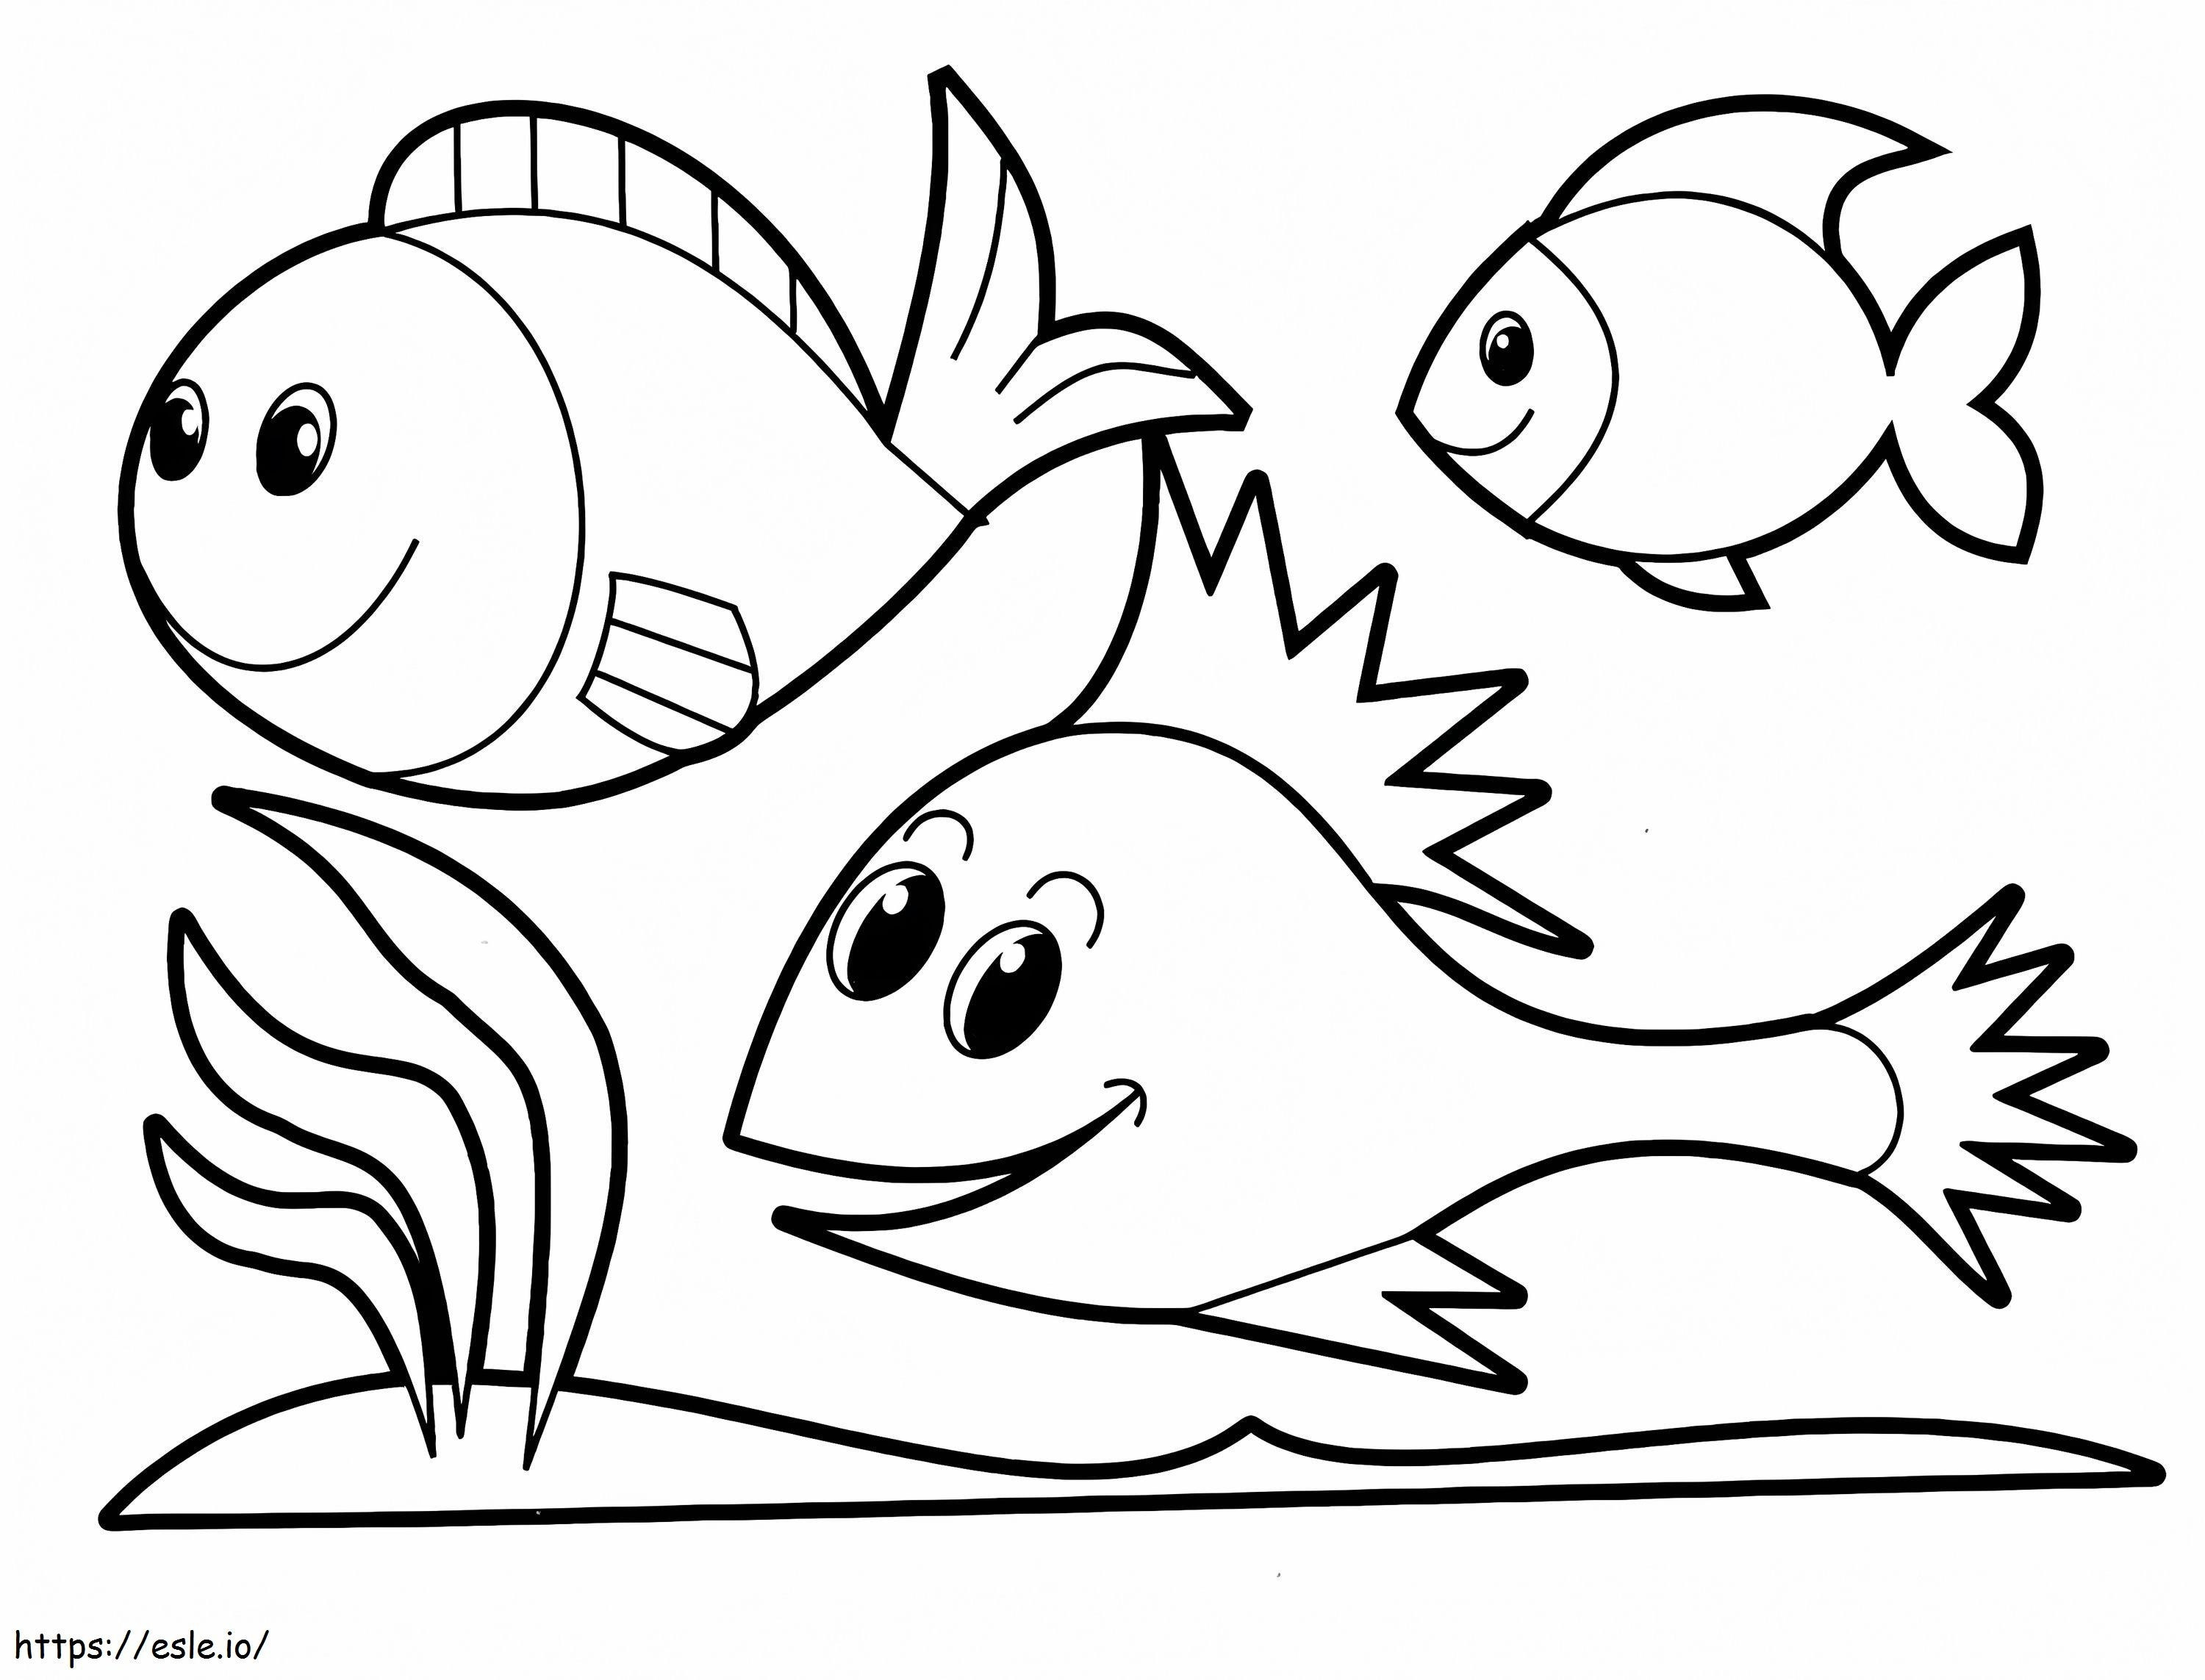 Three Fishes coloring page